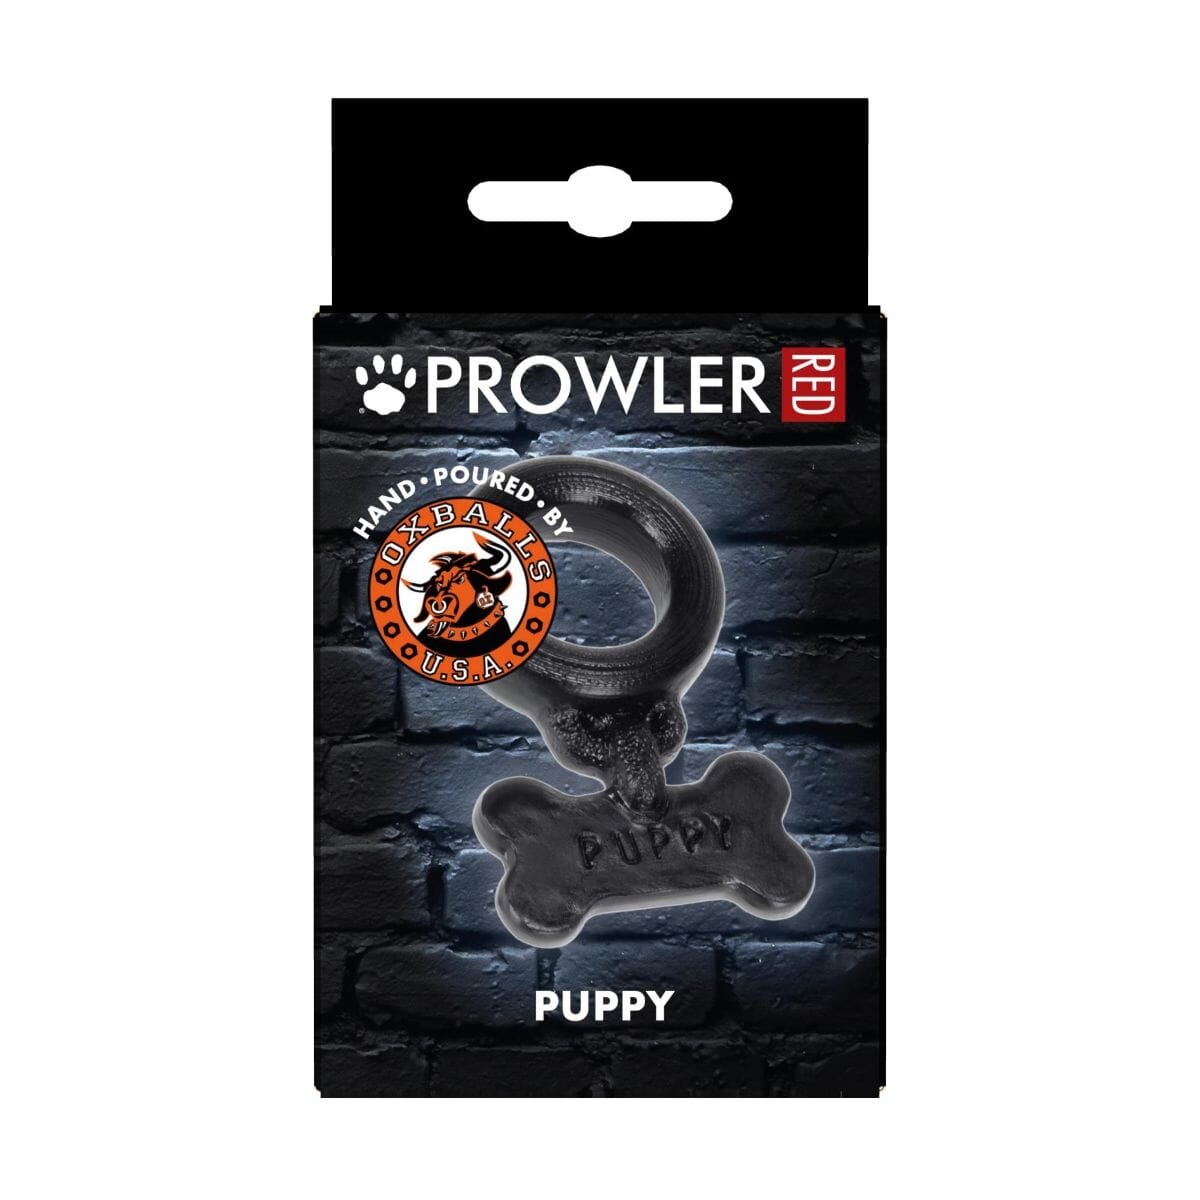 Prowler RED by Oxballs Puppy Cock Ring